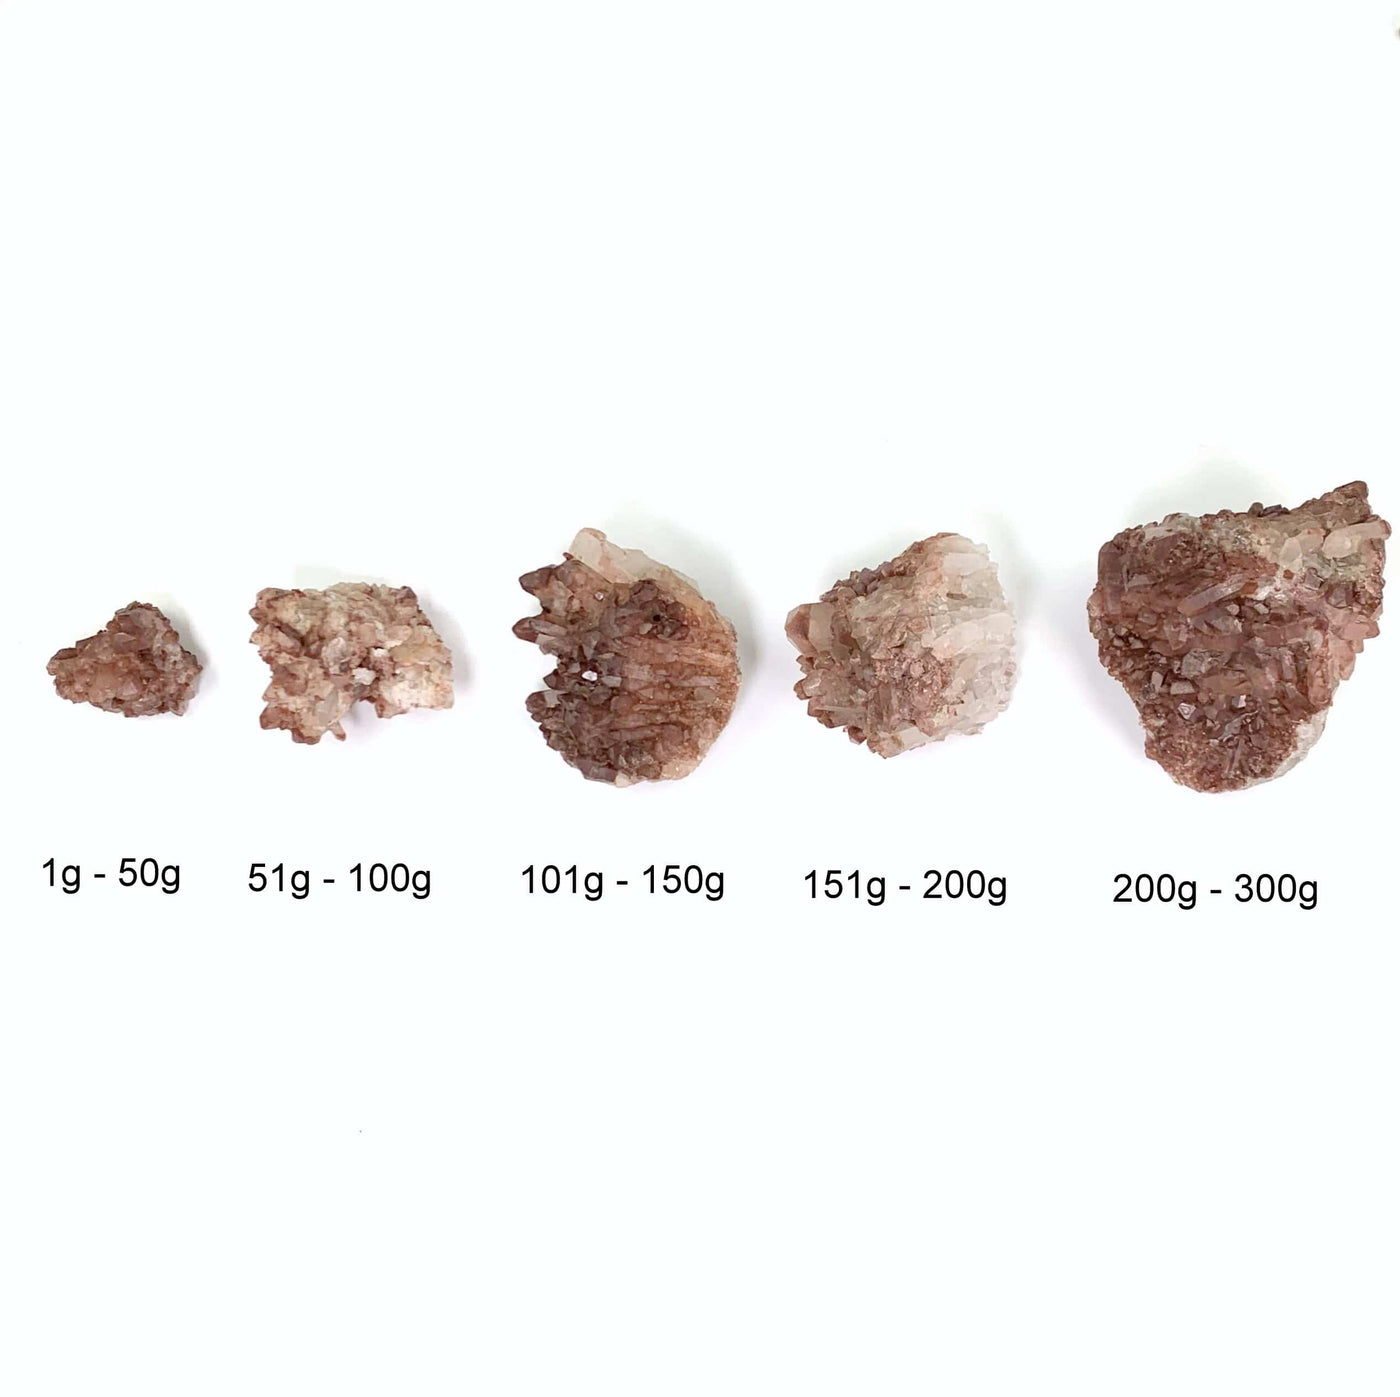 each weight  of lithium quartz quartz clusters labeled on a white background